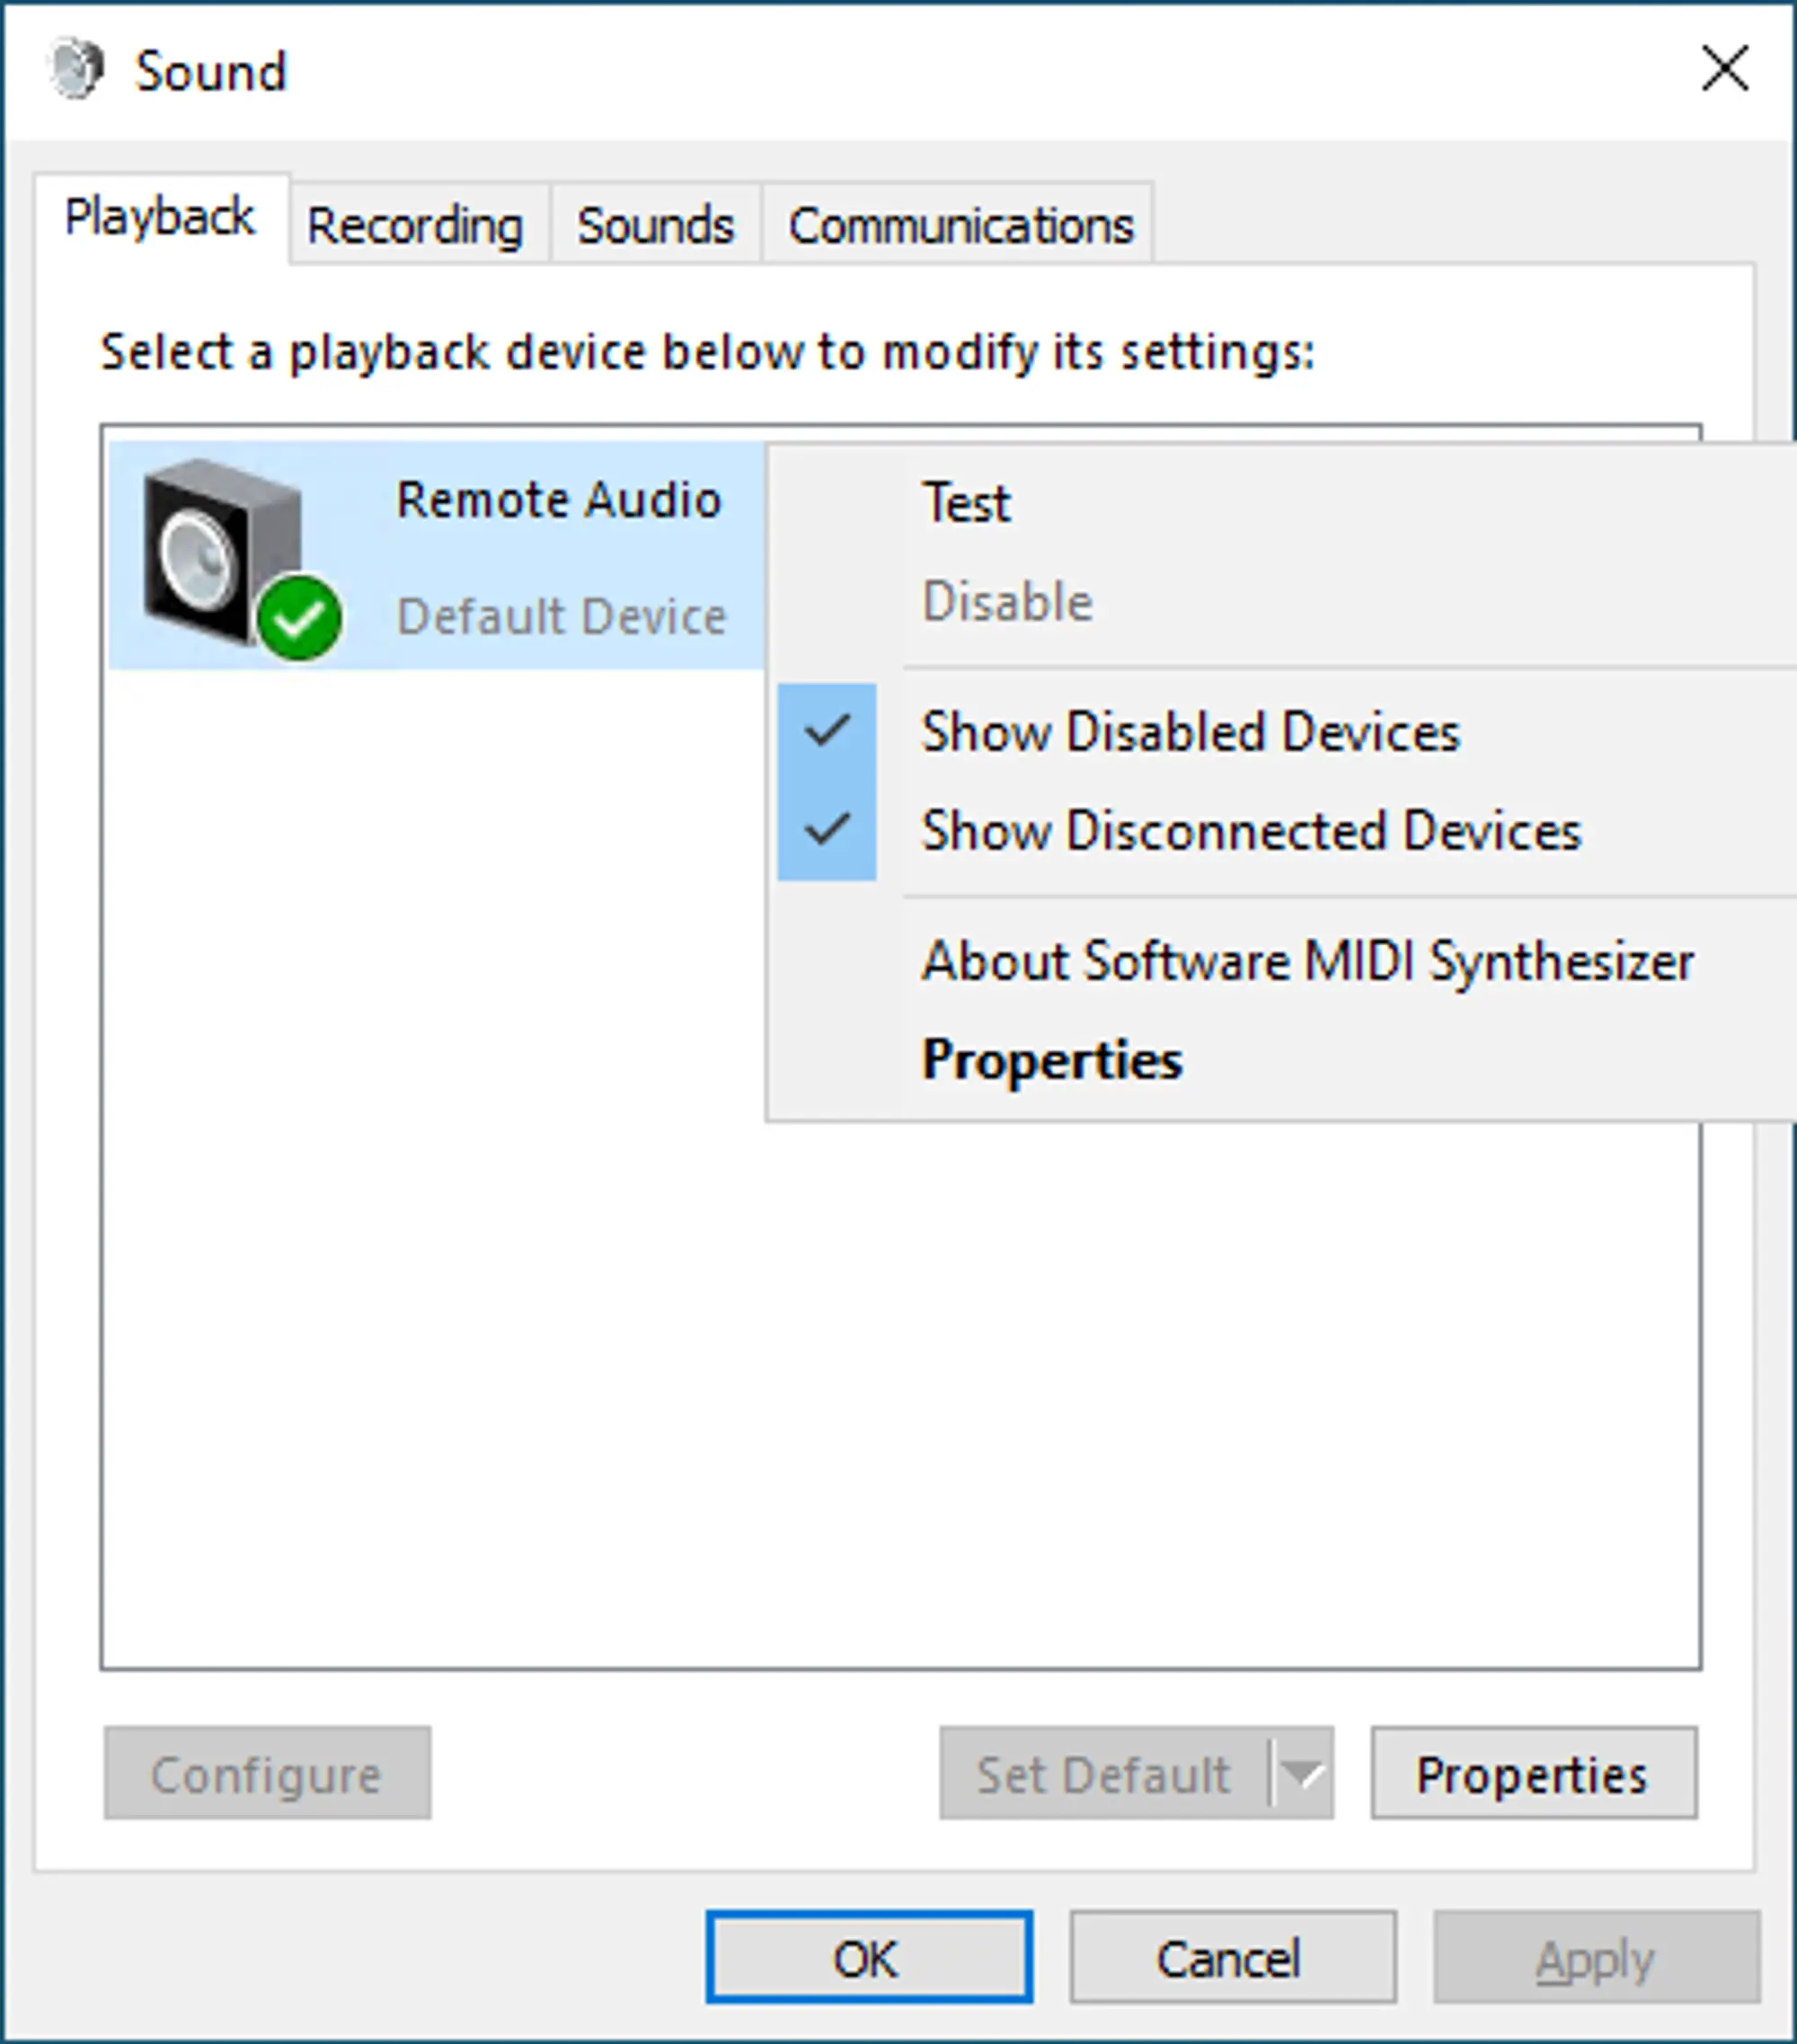 The Windows &quot;Sound&quot; settings page with the &quot;Remote Audio&quot; device selected and the context menu displayed. The &quot;Test&quot; option is the first entry in the context menu. 